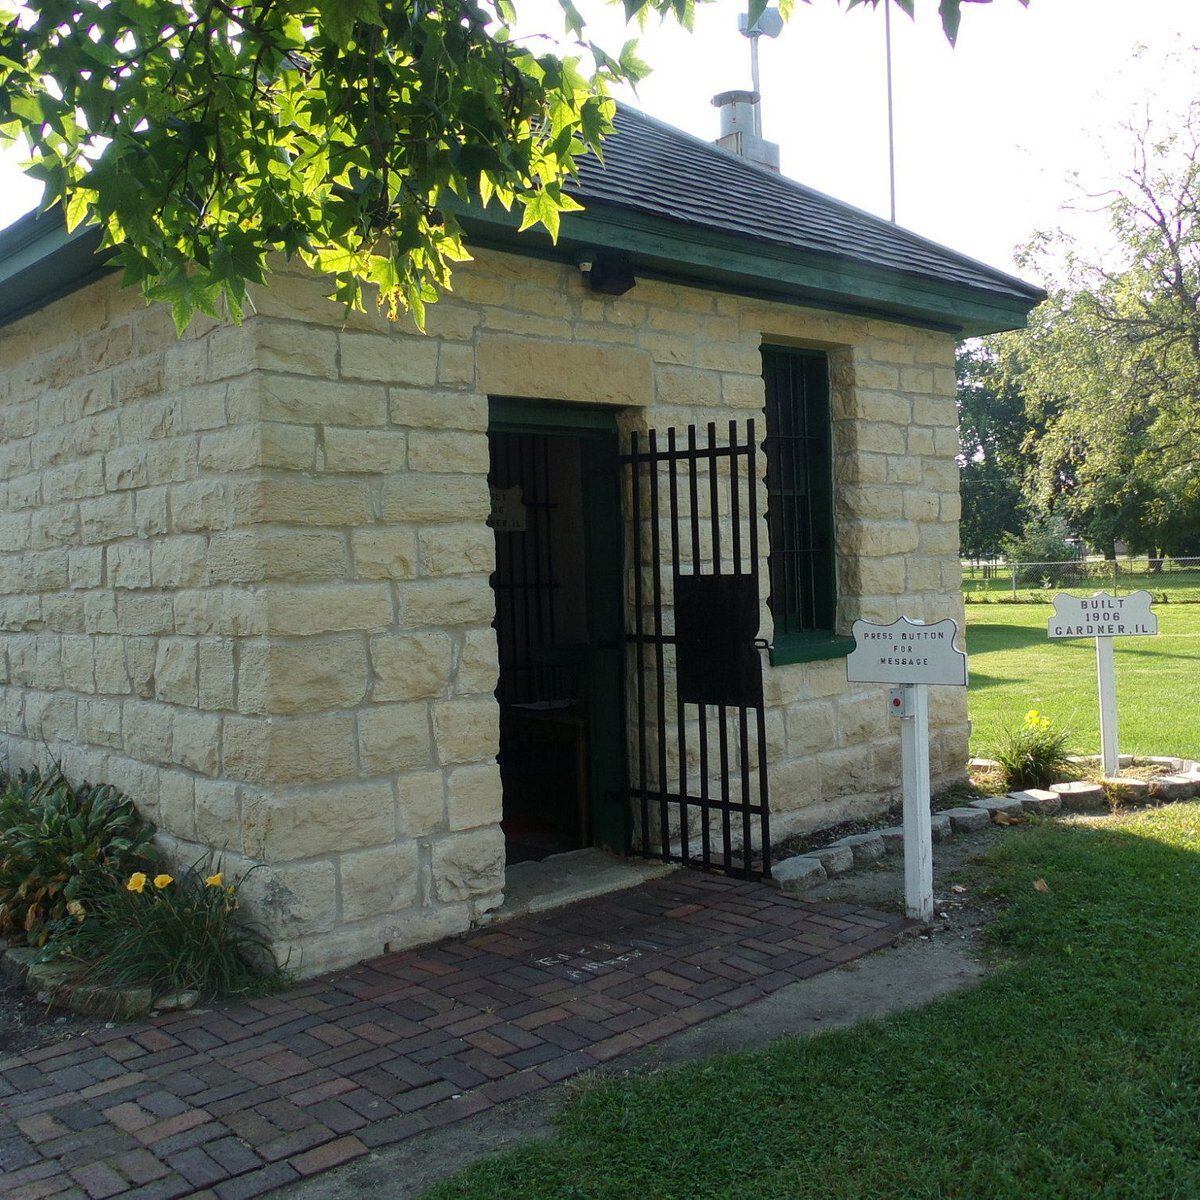 Two Cell Jail - Photo provided by Heritage Corridor Destinations